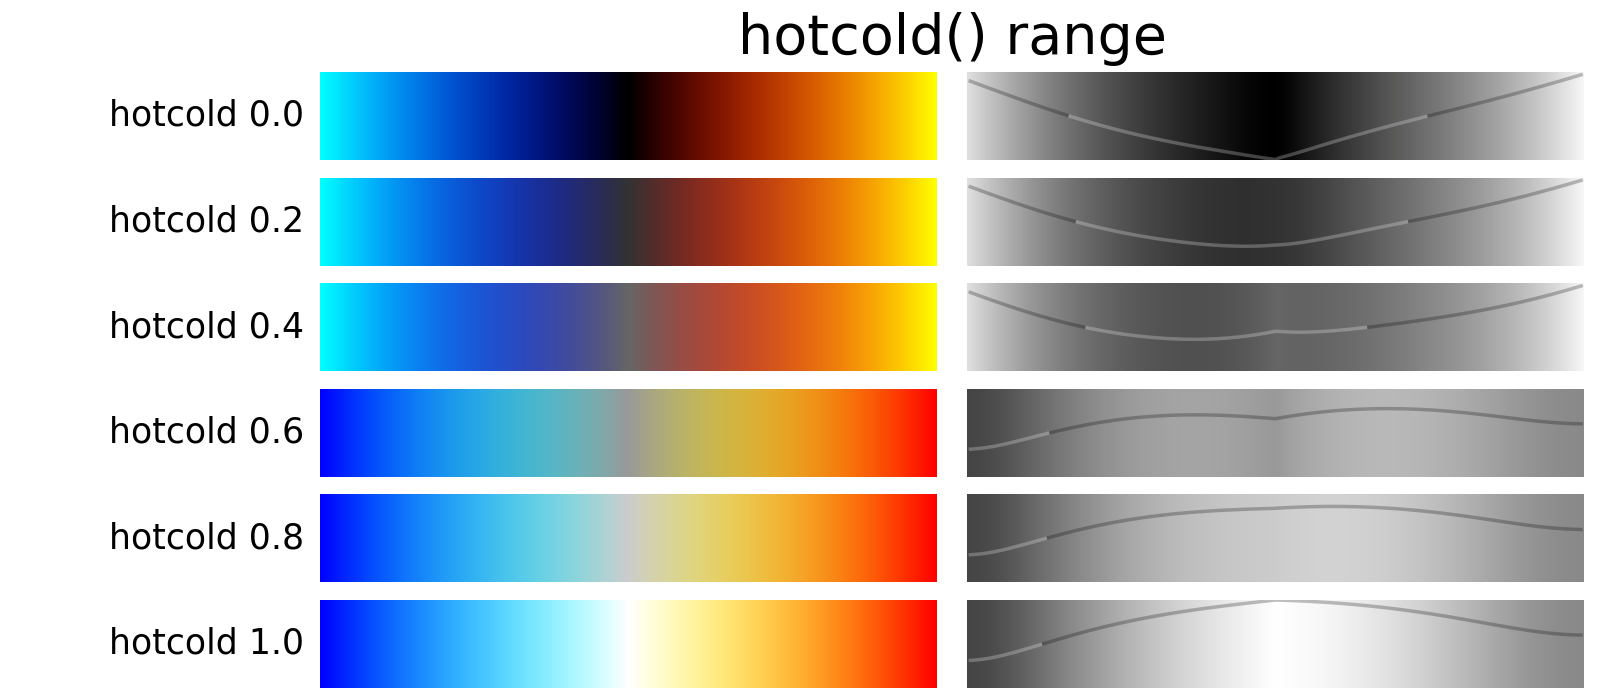 hotcold colormaps of 0.0, 0.2, 0.4, 0.6, 0.8, 1.0 neutral